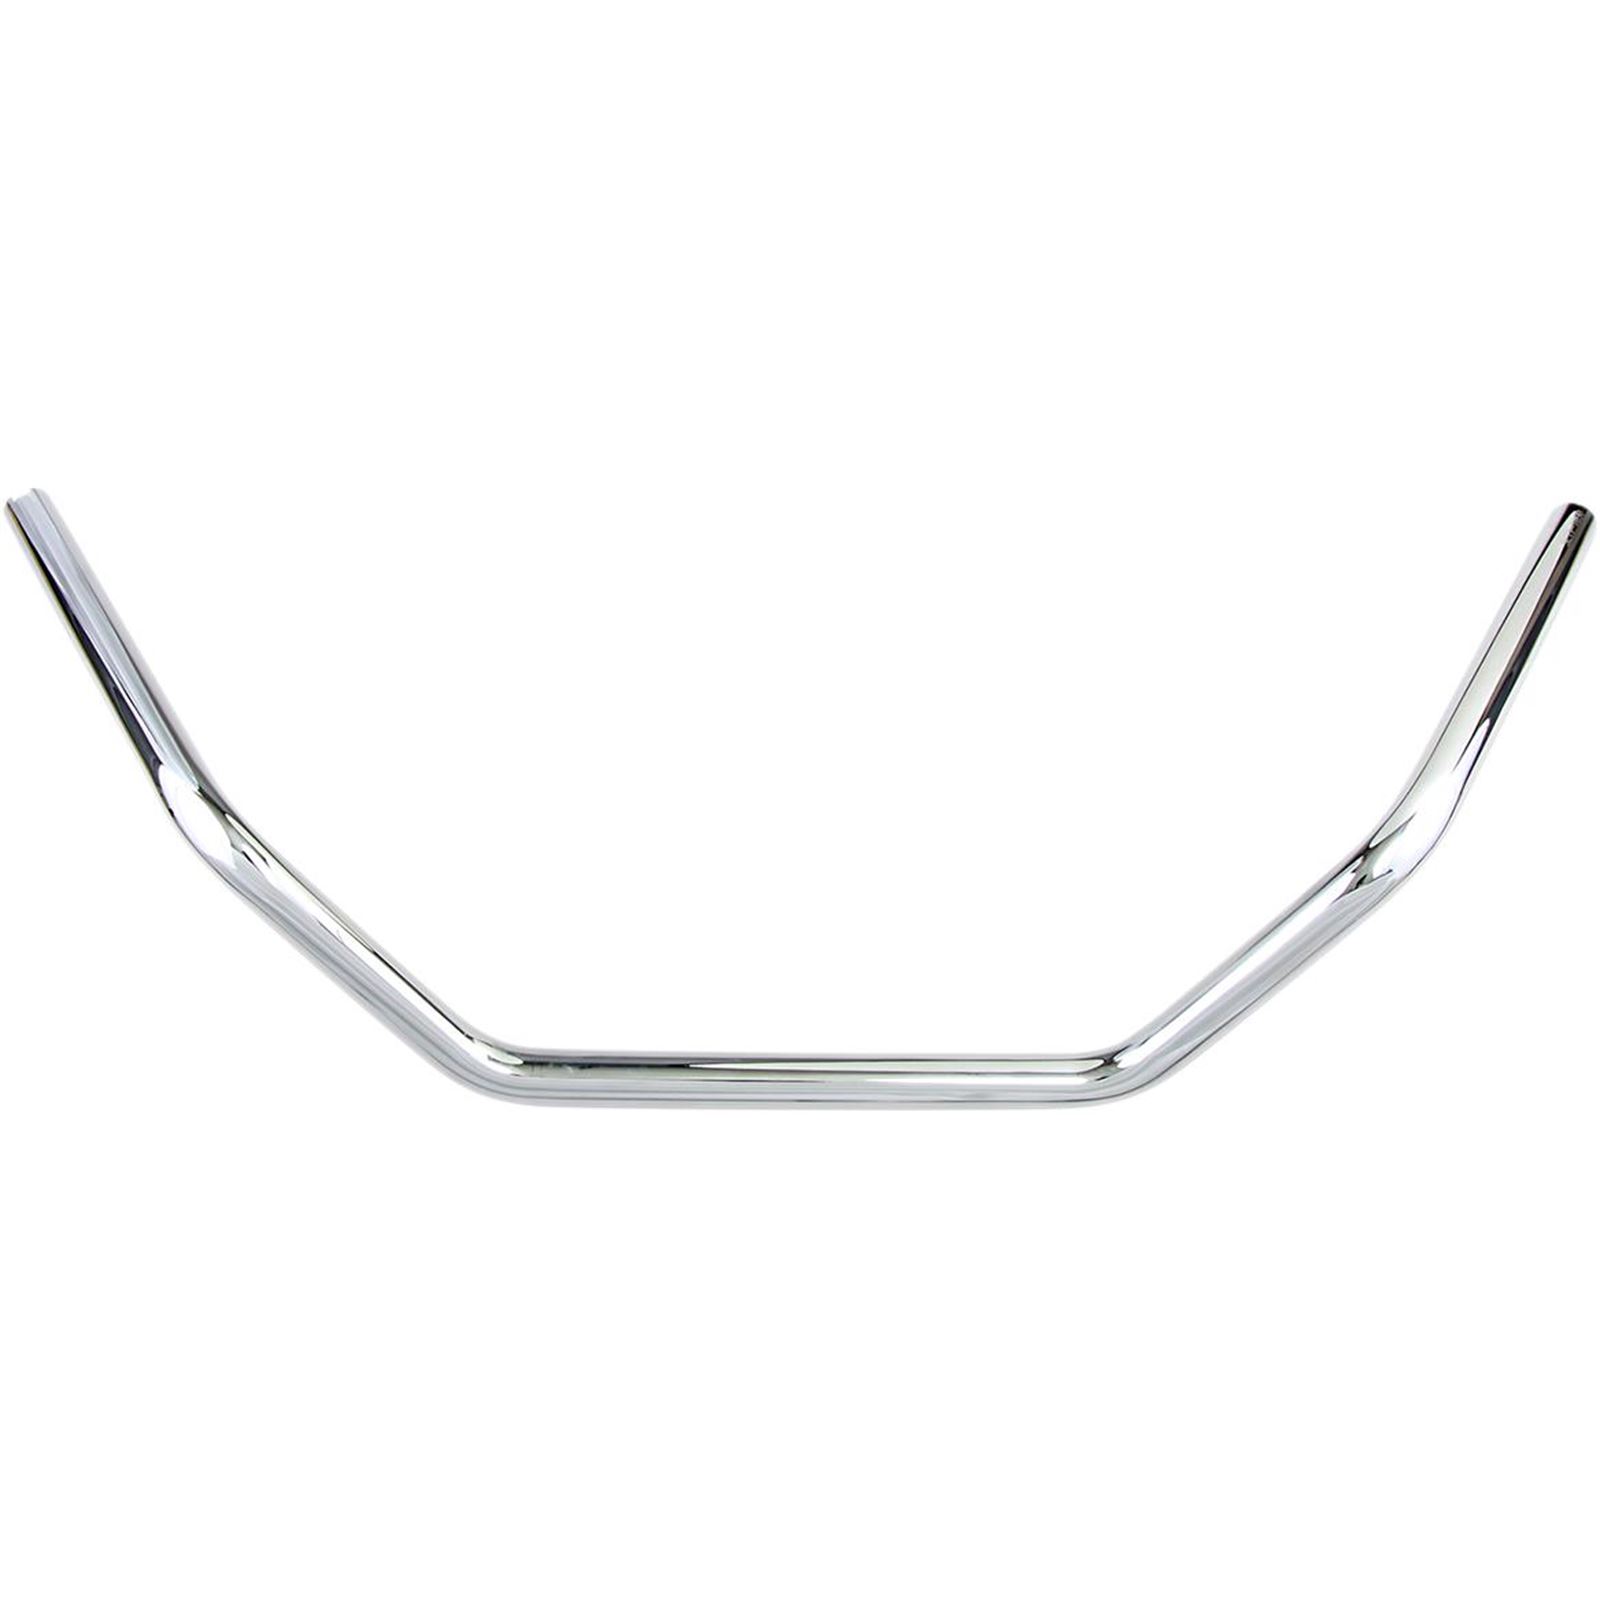 Drag Specialties Chrome 1" Bagger Handlebar for Throttle-by-Wire